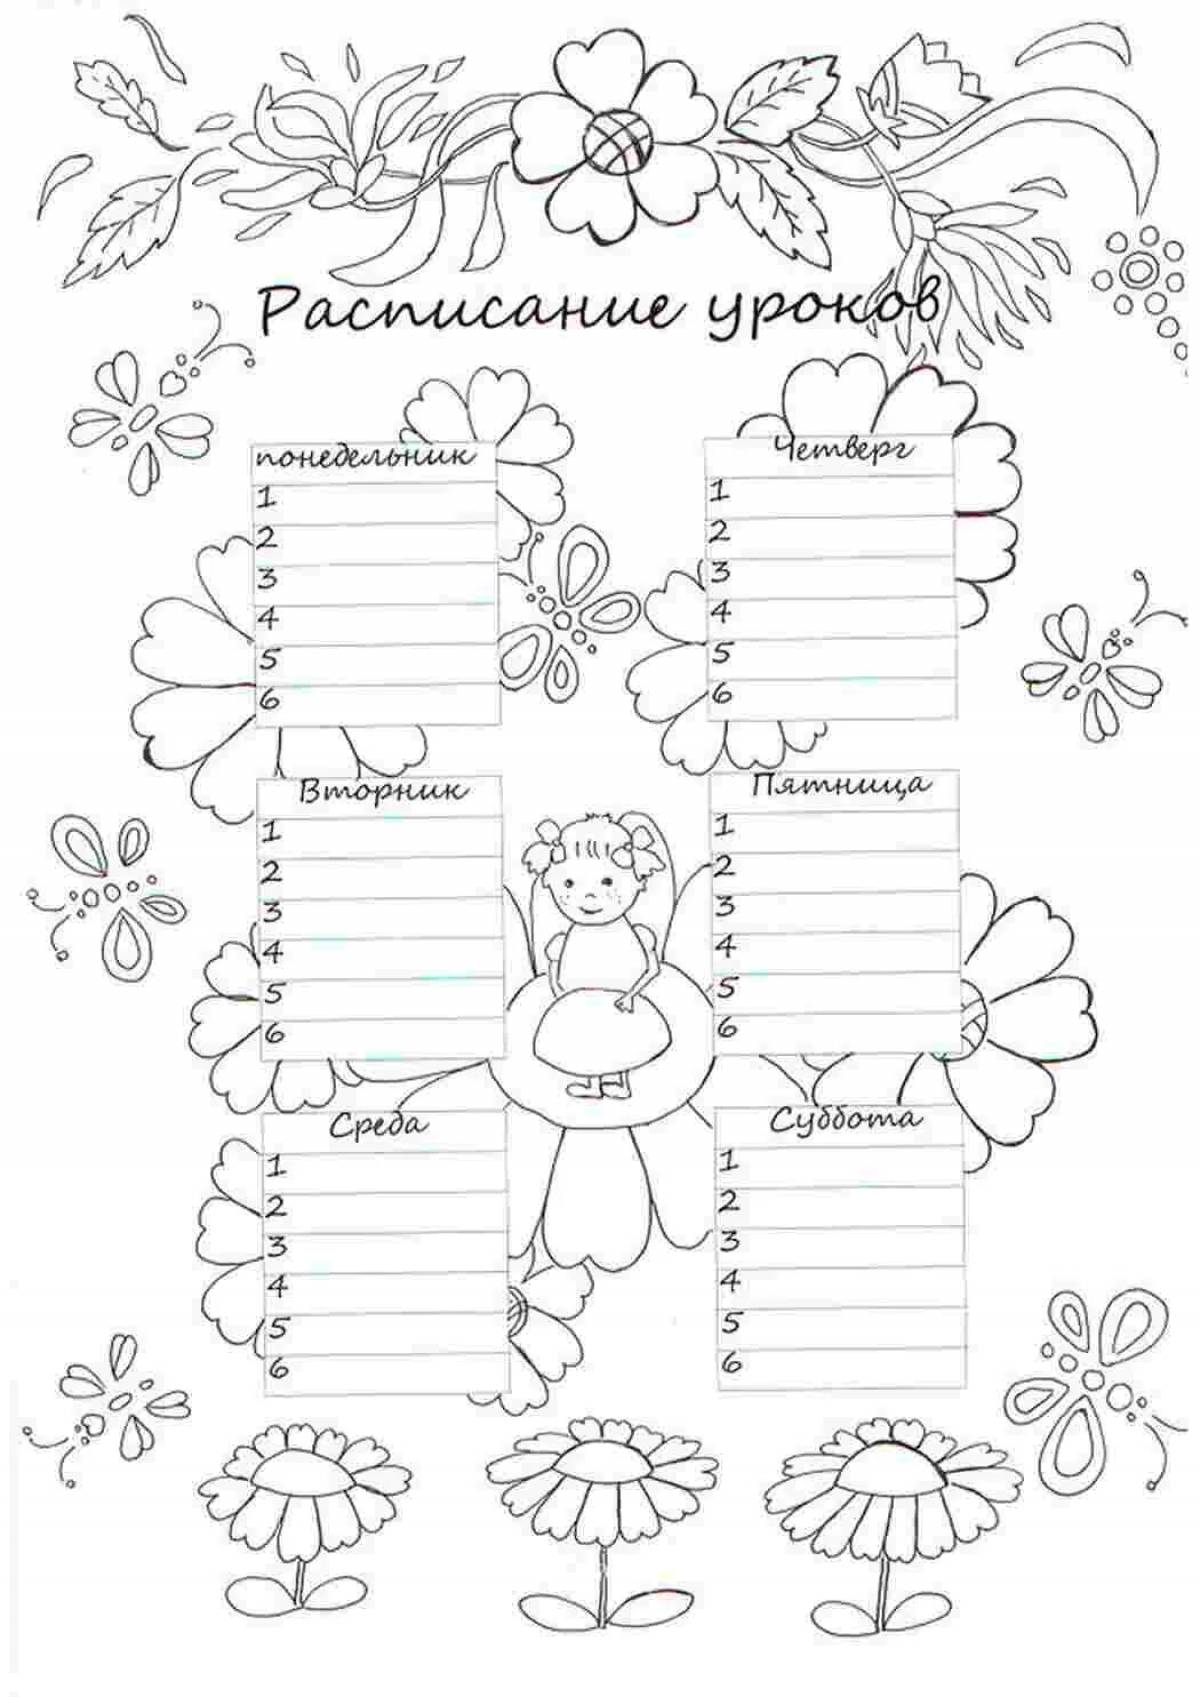 Timetable templates for girls #3